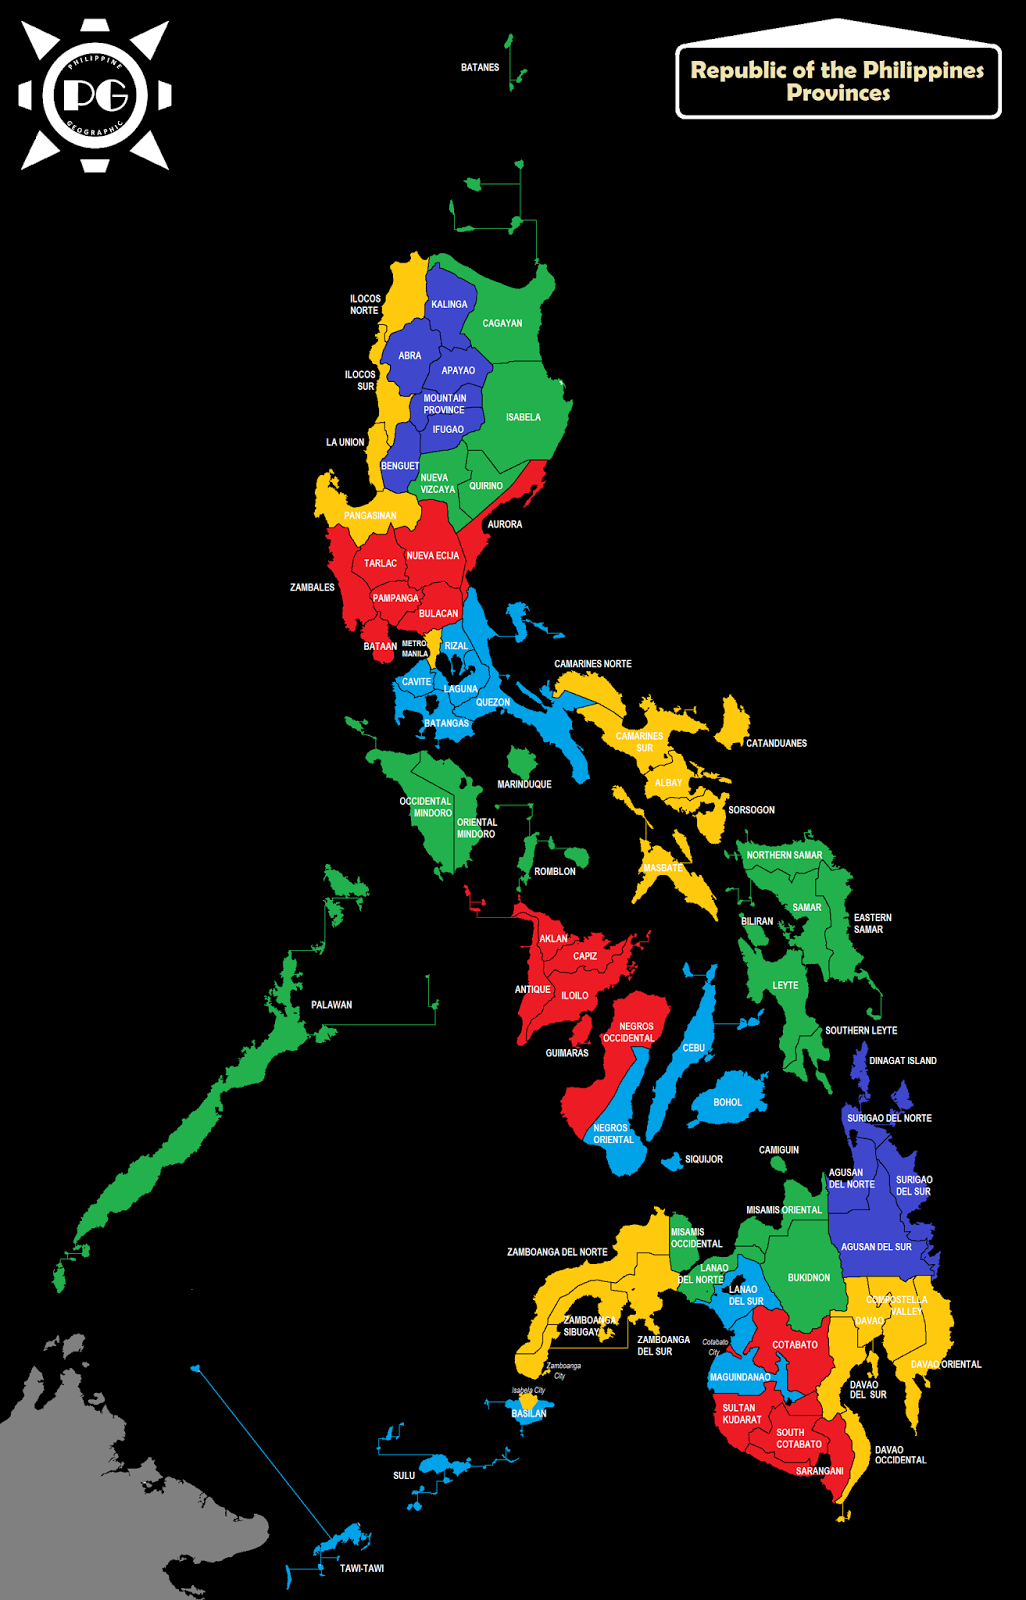 Philippines Political Map - Bank2home.com